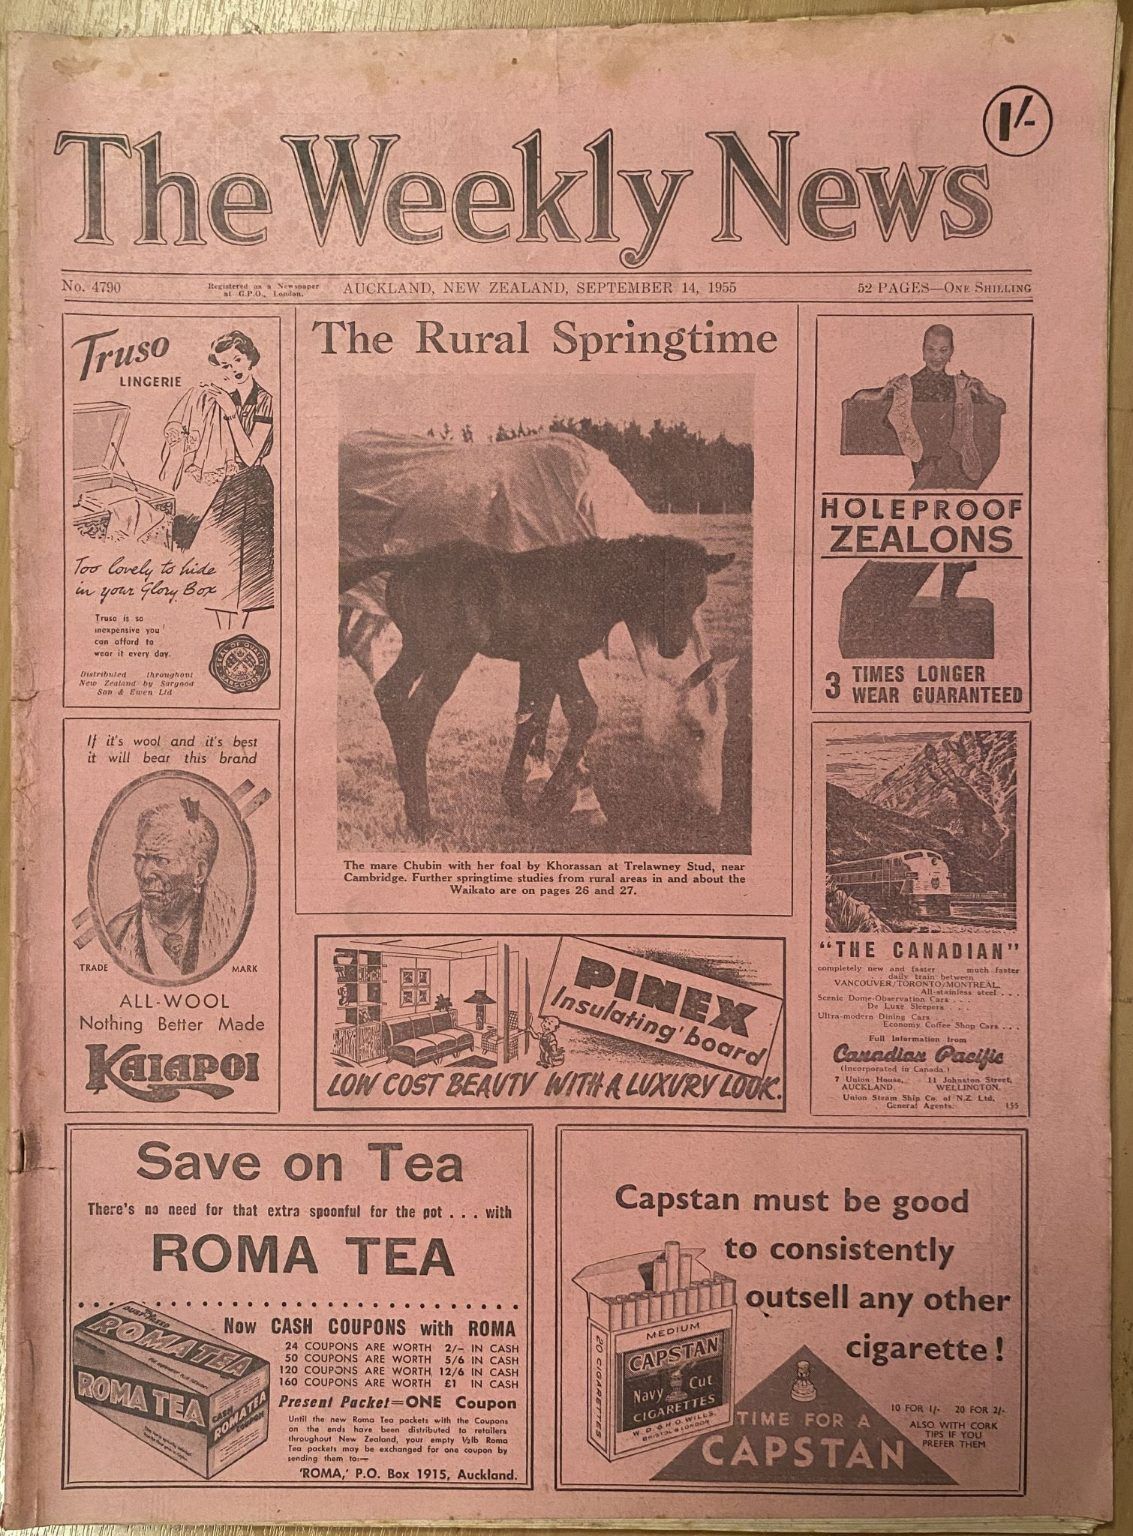 OLD NEWSPAPER: The Weekly News - No. 4790, 14 September 1955